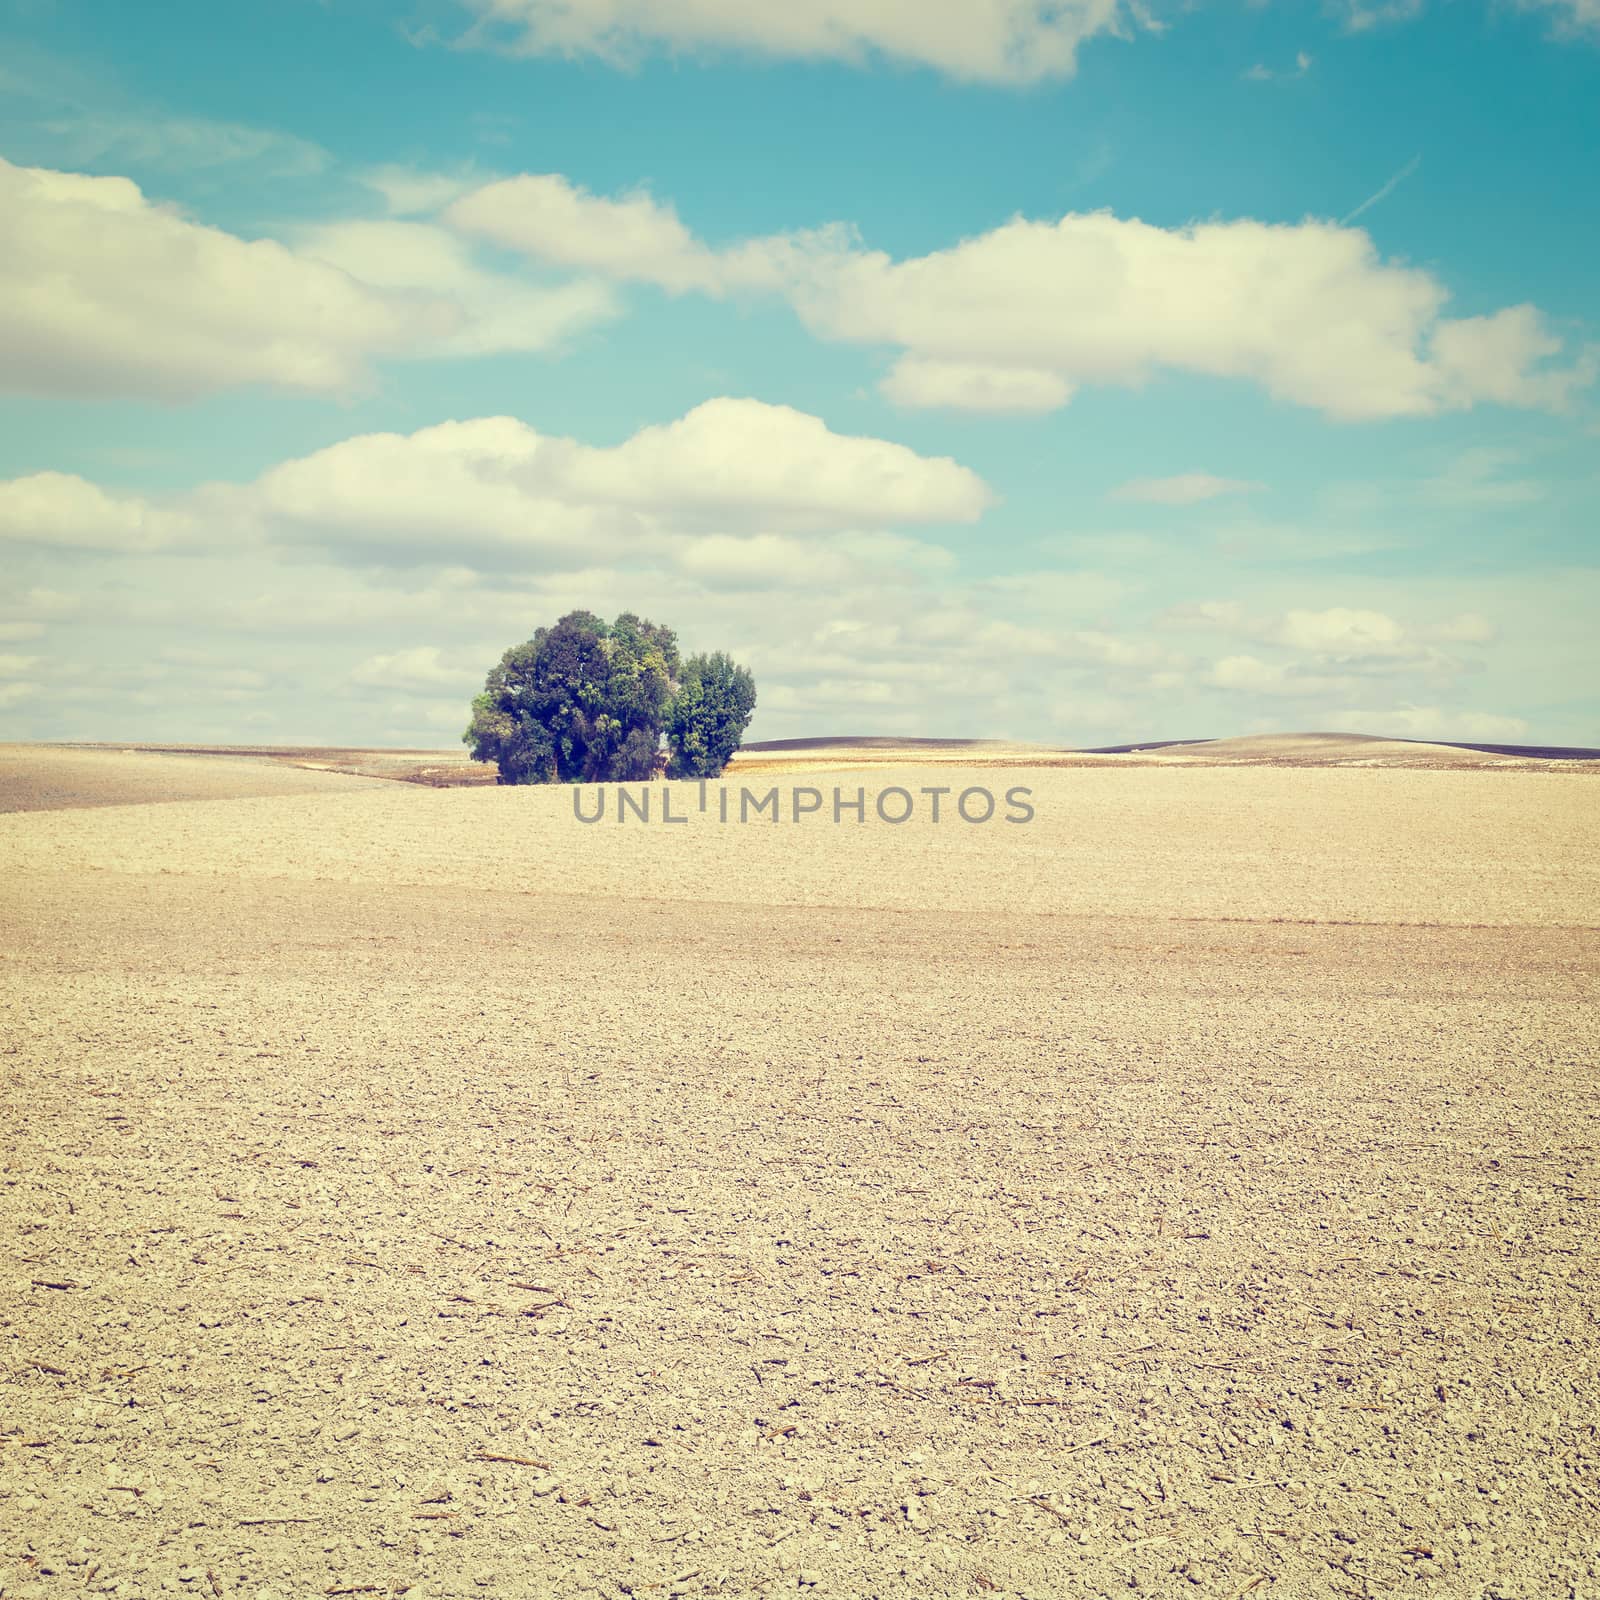 Plowed Sloping Hills of Spain in the Autumn, Instagram Effect